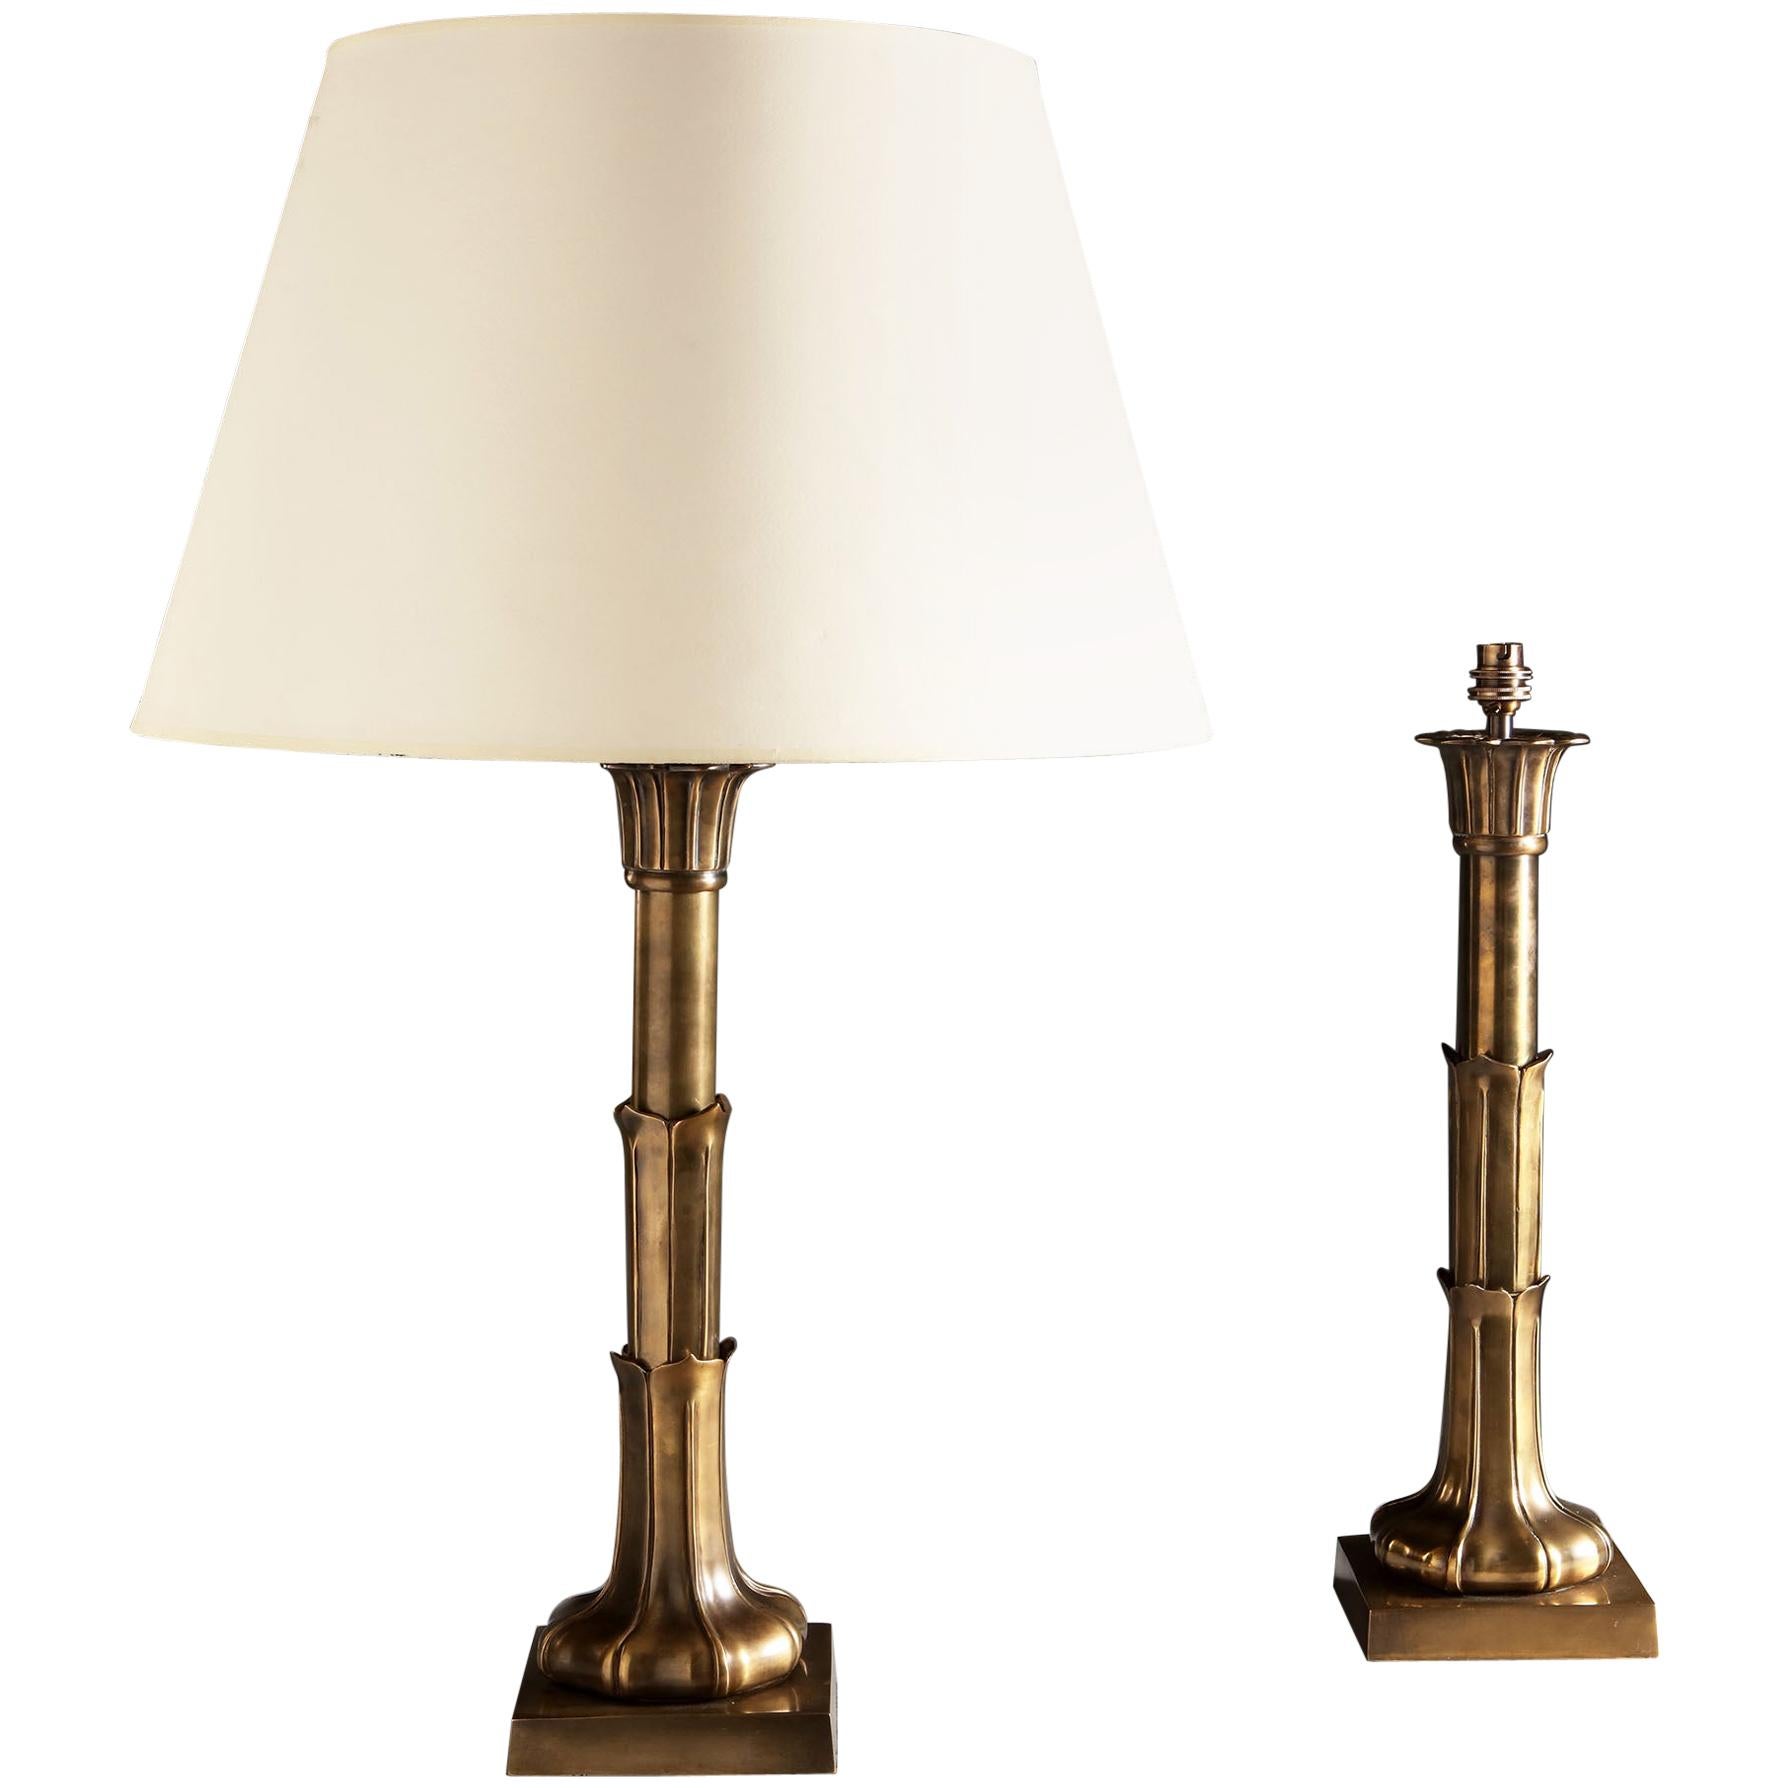 A Large Pair of 19th Century William IV Style Brass Column Table Lamps  For Sale